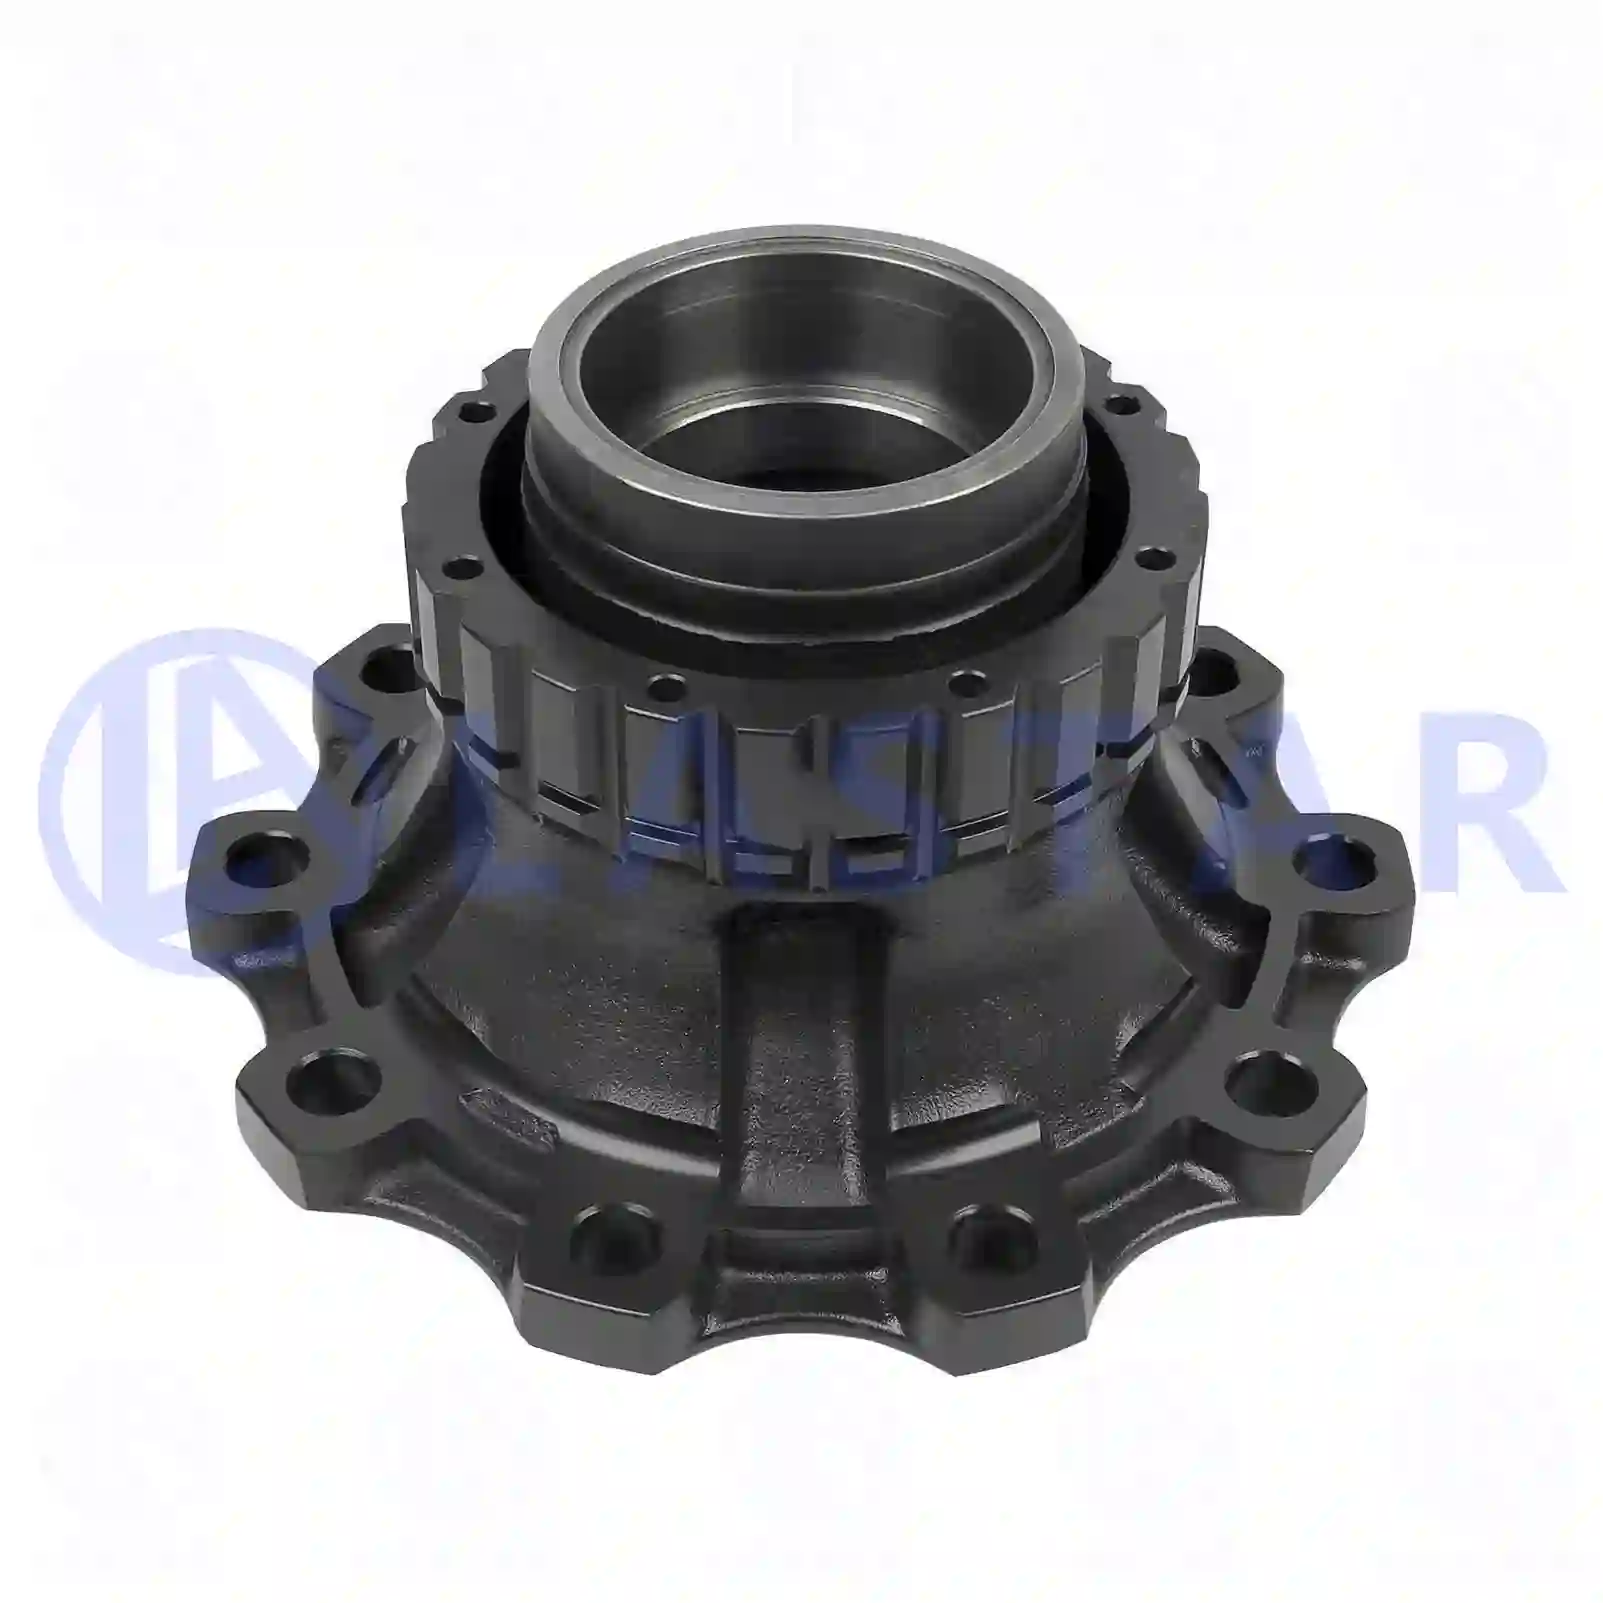 Wheel hub, without bearings, without ABS ring, 77726602, 7420535202, 7421024206, 7421116569, 7485114470, 20535202, 21024206, 21116389, 21116569, 21116584S2, 21946101, 85107750, 85111448, 85111791, 85114470, ZG30241-0008 ||  77726602 Lastar Spare Part | Truck Spare Parts, Auotomotive Spare Parts Wheel hub, without bearings, without ABS ring, 77726602, 7420535202, 7421024206, 7421116569, 7485114470, 20535202, 21024206, 21116389, 21116569, 21116584S2, 21946101, 85107750, 85111448, 85111791, 85114470, ZG30241-0008 ||  77726602 Lastar Spare Part | Truck Spare Parts, Auotomotive Spare Parts